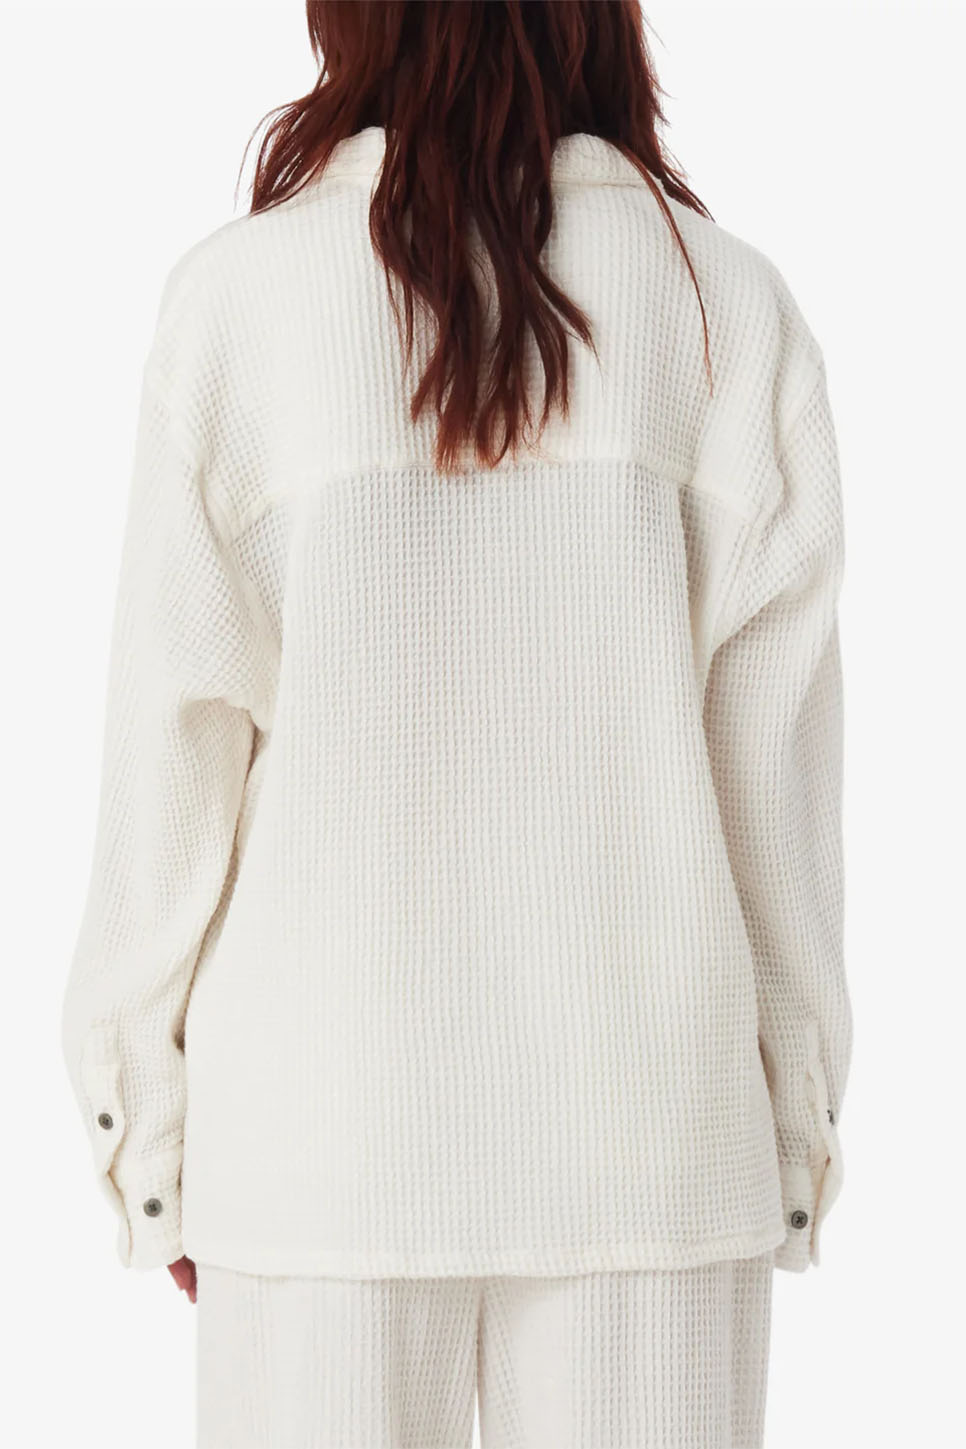 Obey - Camille Waffle Shirt - Muted White - Back